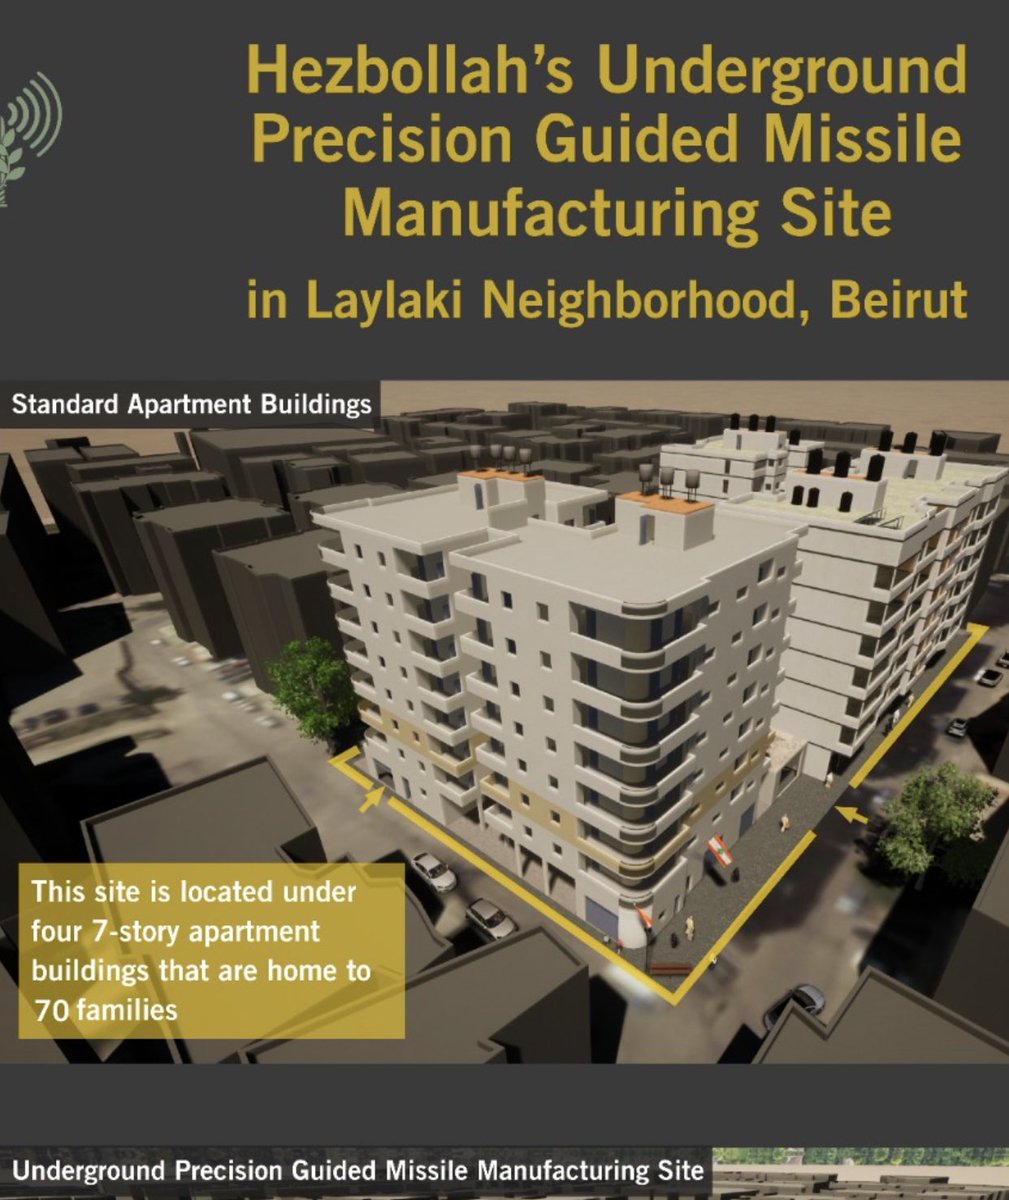 Hezbollah’s precision-guided missile manufacturing site is located under four seven-story apartment buildings in Beirut that are home to 70 families. Hezbollah should be designated by  @USTreasury for war crimes.